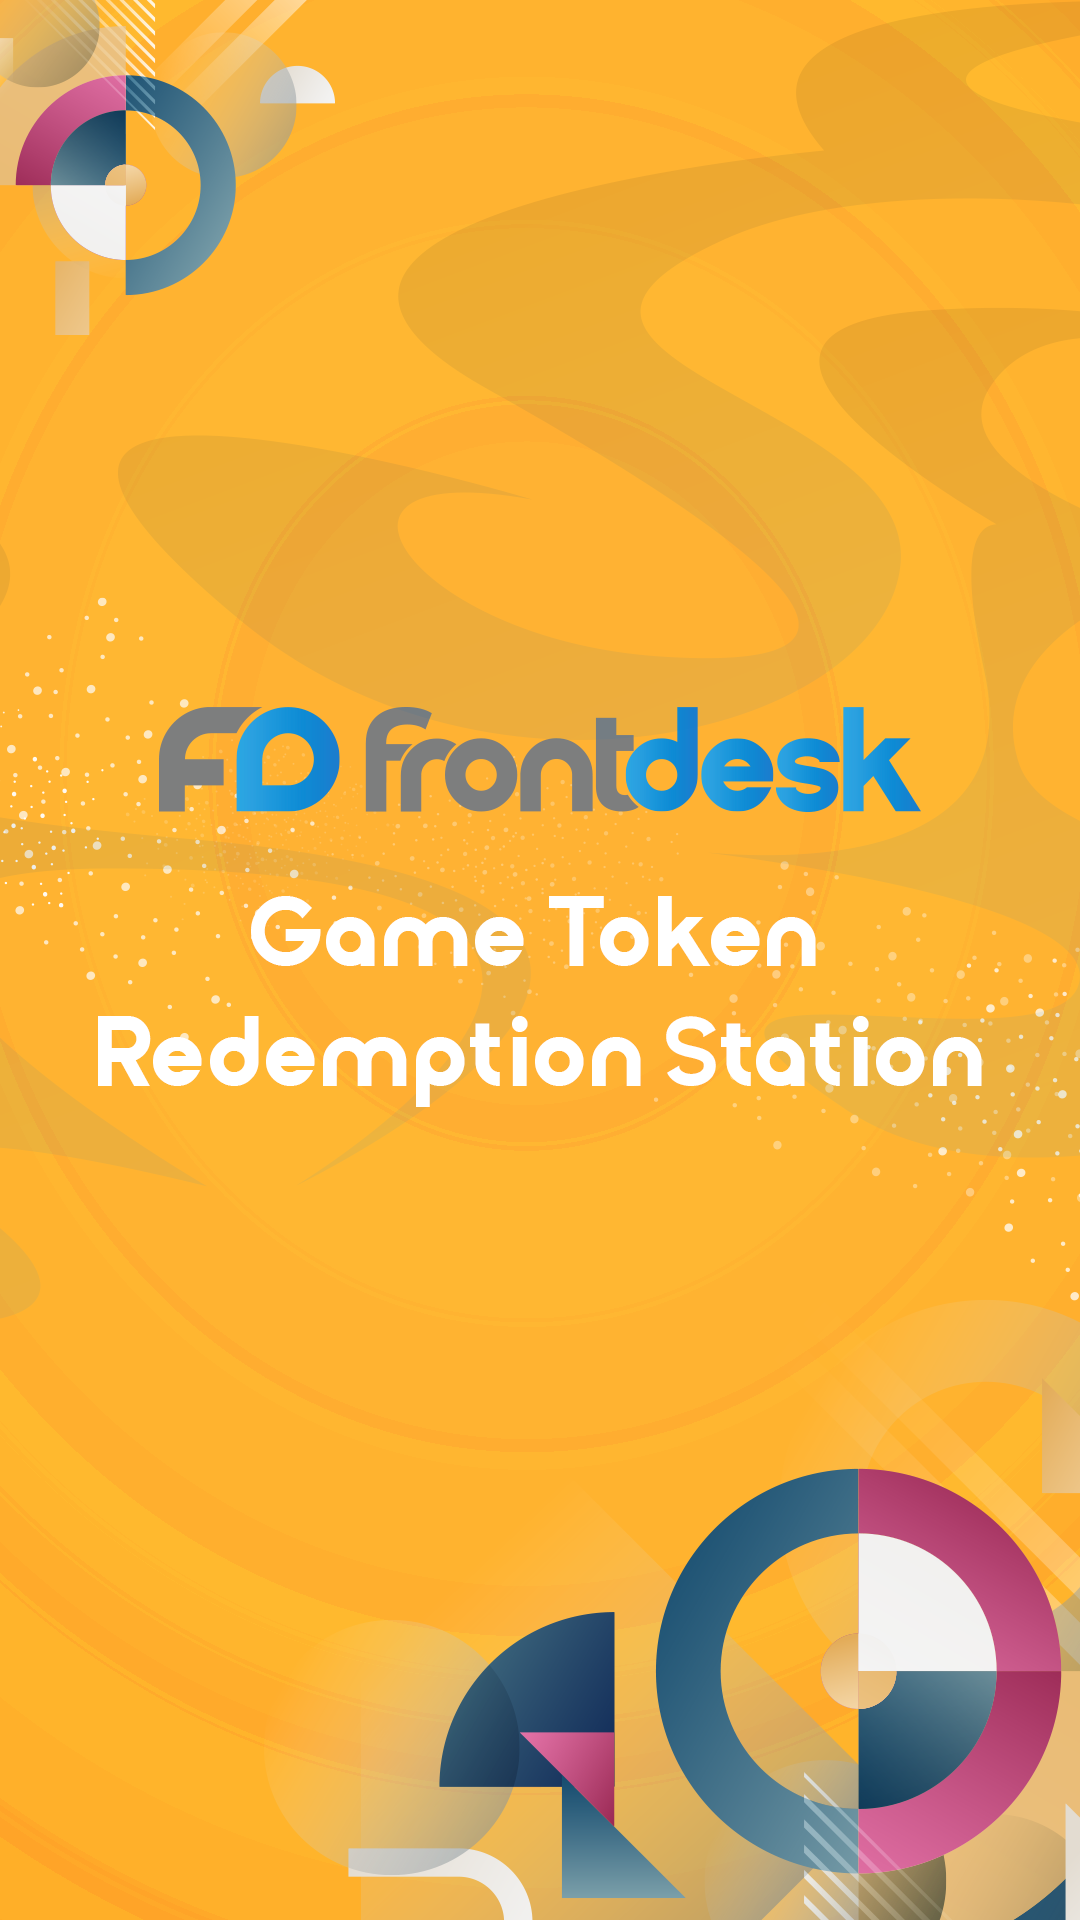 The image shows an Event Technology Kiosk designed specifically for game token redemption. The kiosk serves as a station where event attendees can redeem game tokens, likely earned or purchased, to access games or activities within the event. The kiosk is equipped with features and interfaces that facilitate the redemption process, allowing attendees to exchange their tokens for gaming opportunities or rewards.